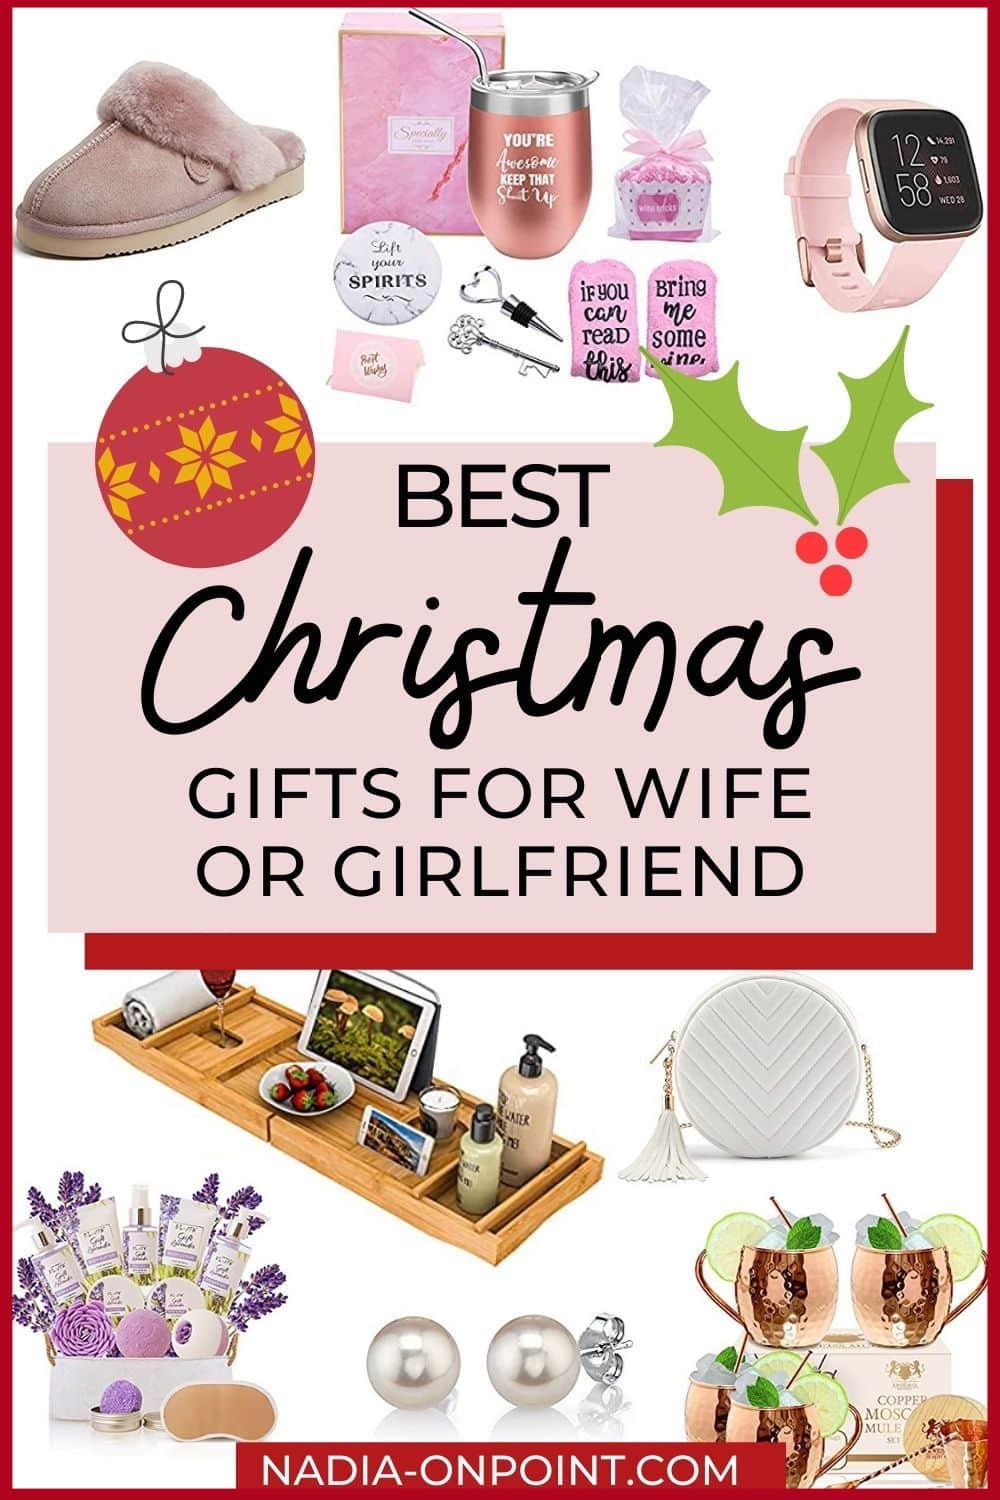 Best Christmas Gifts for Wife or Girlfriend OnPoint Gift Ideas